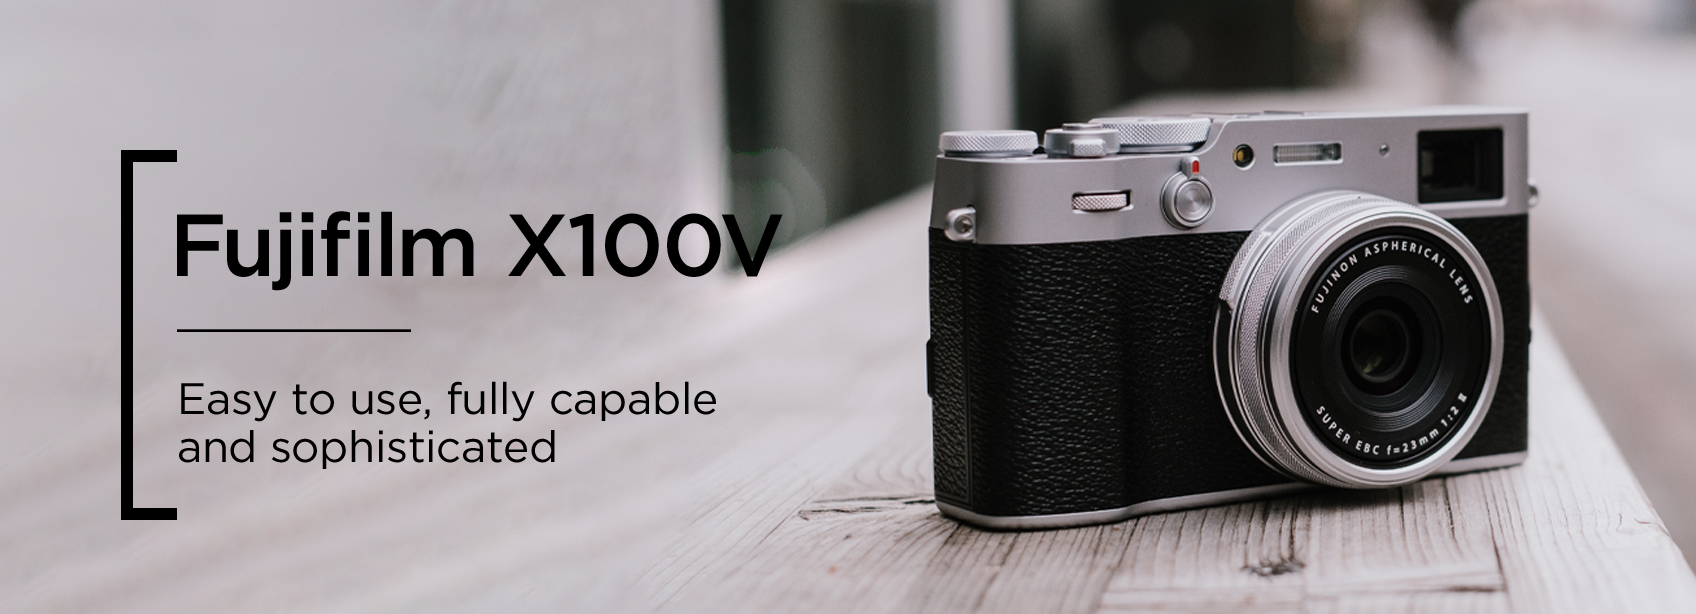 The new Fujifilm X100V - Easy to use, fully capable and sophisticated